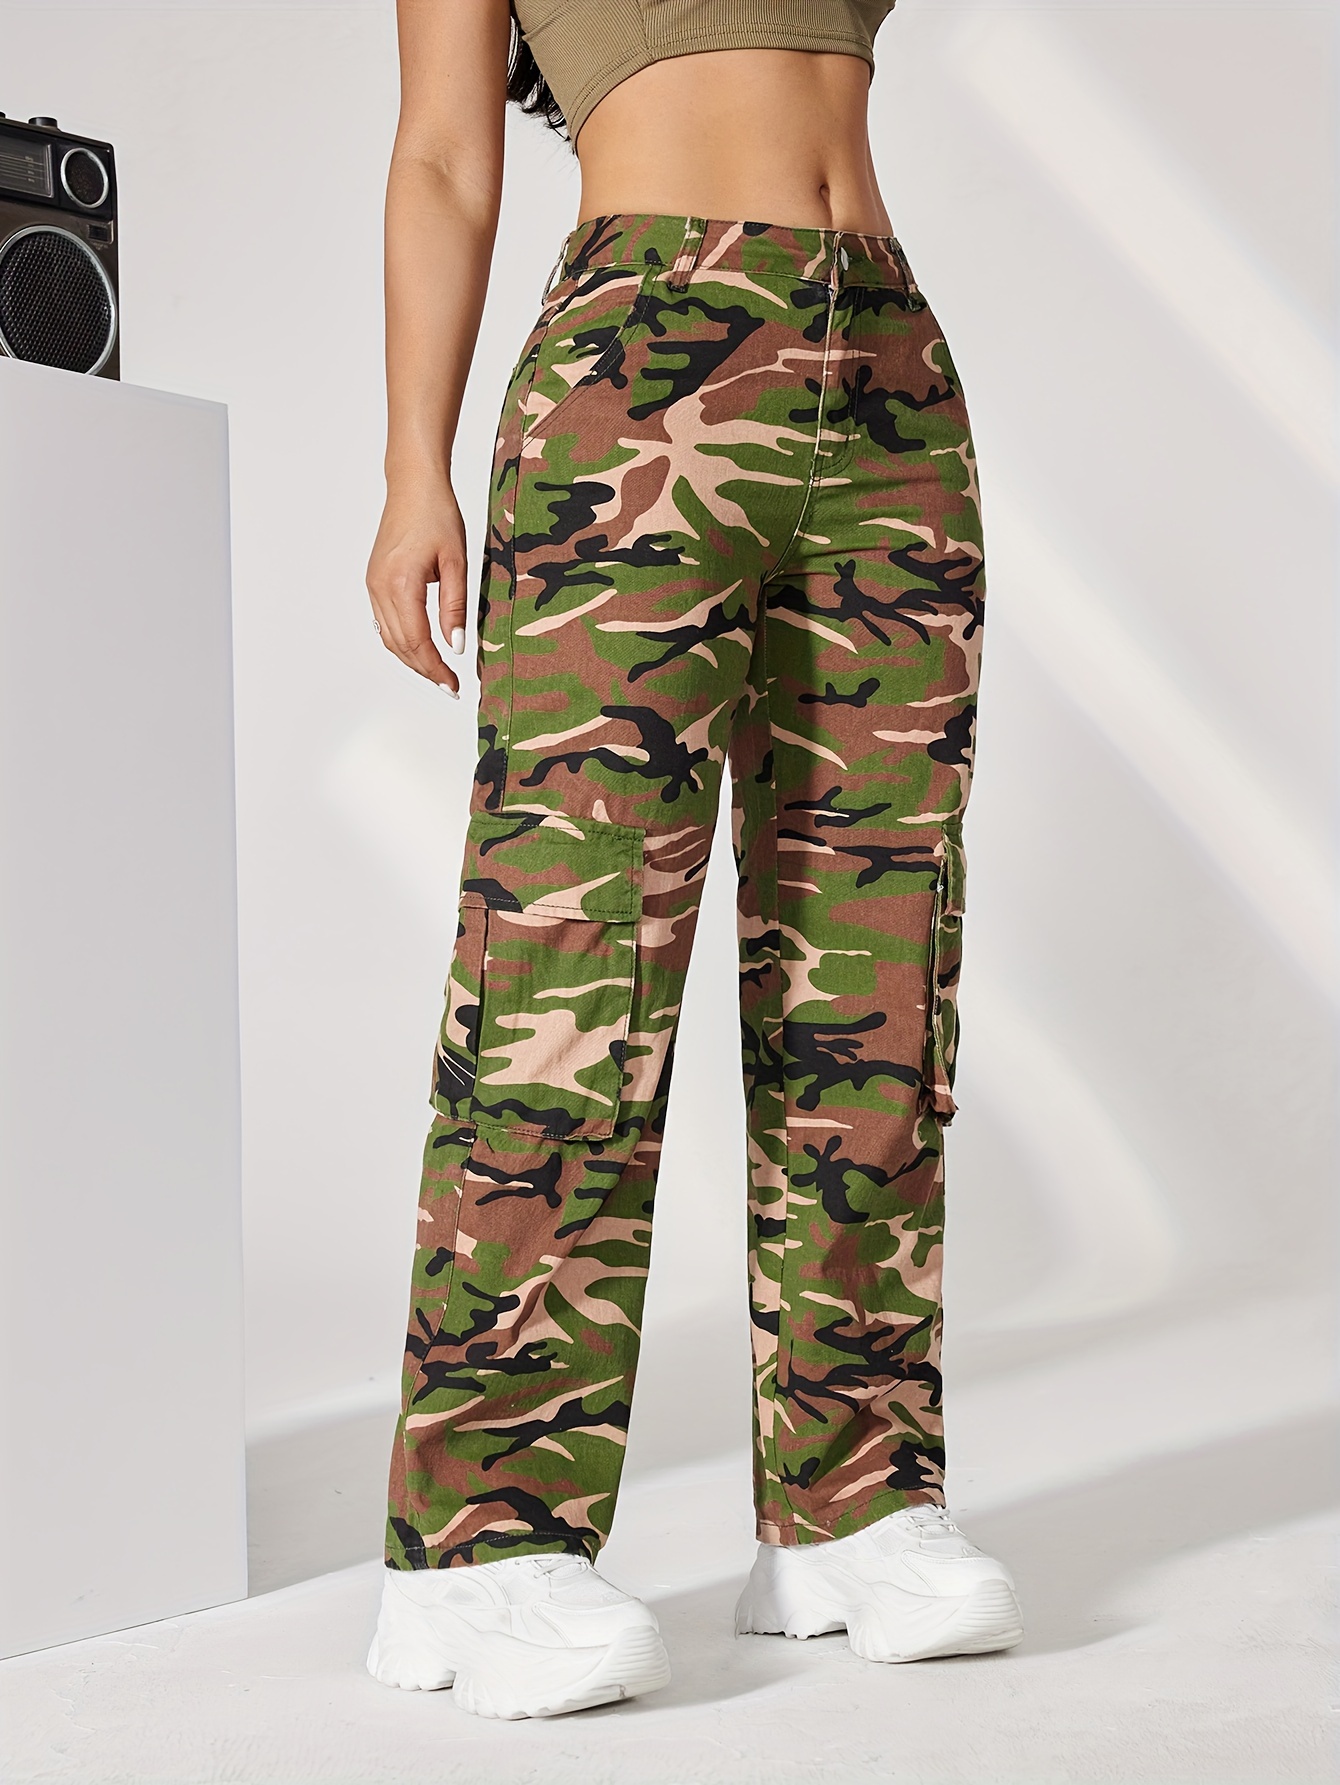  Women's Camo Cargo Pants High Waist Slim Fit Camouflage Jogger  Pants Sweatpants with Pockets : Clothing, Shoes & Jewelry